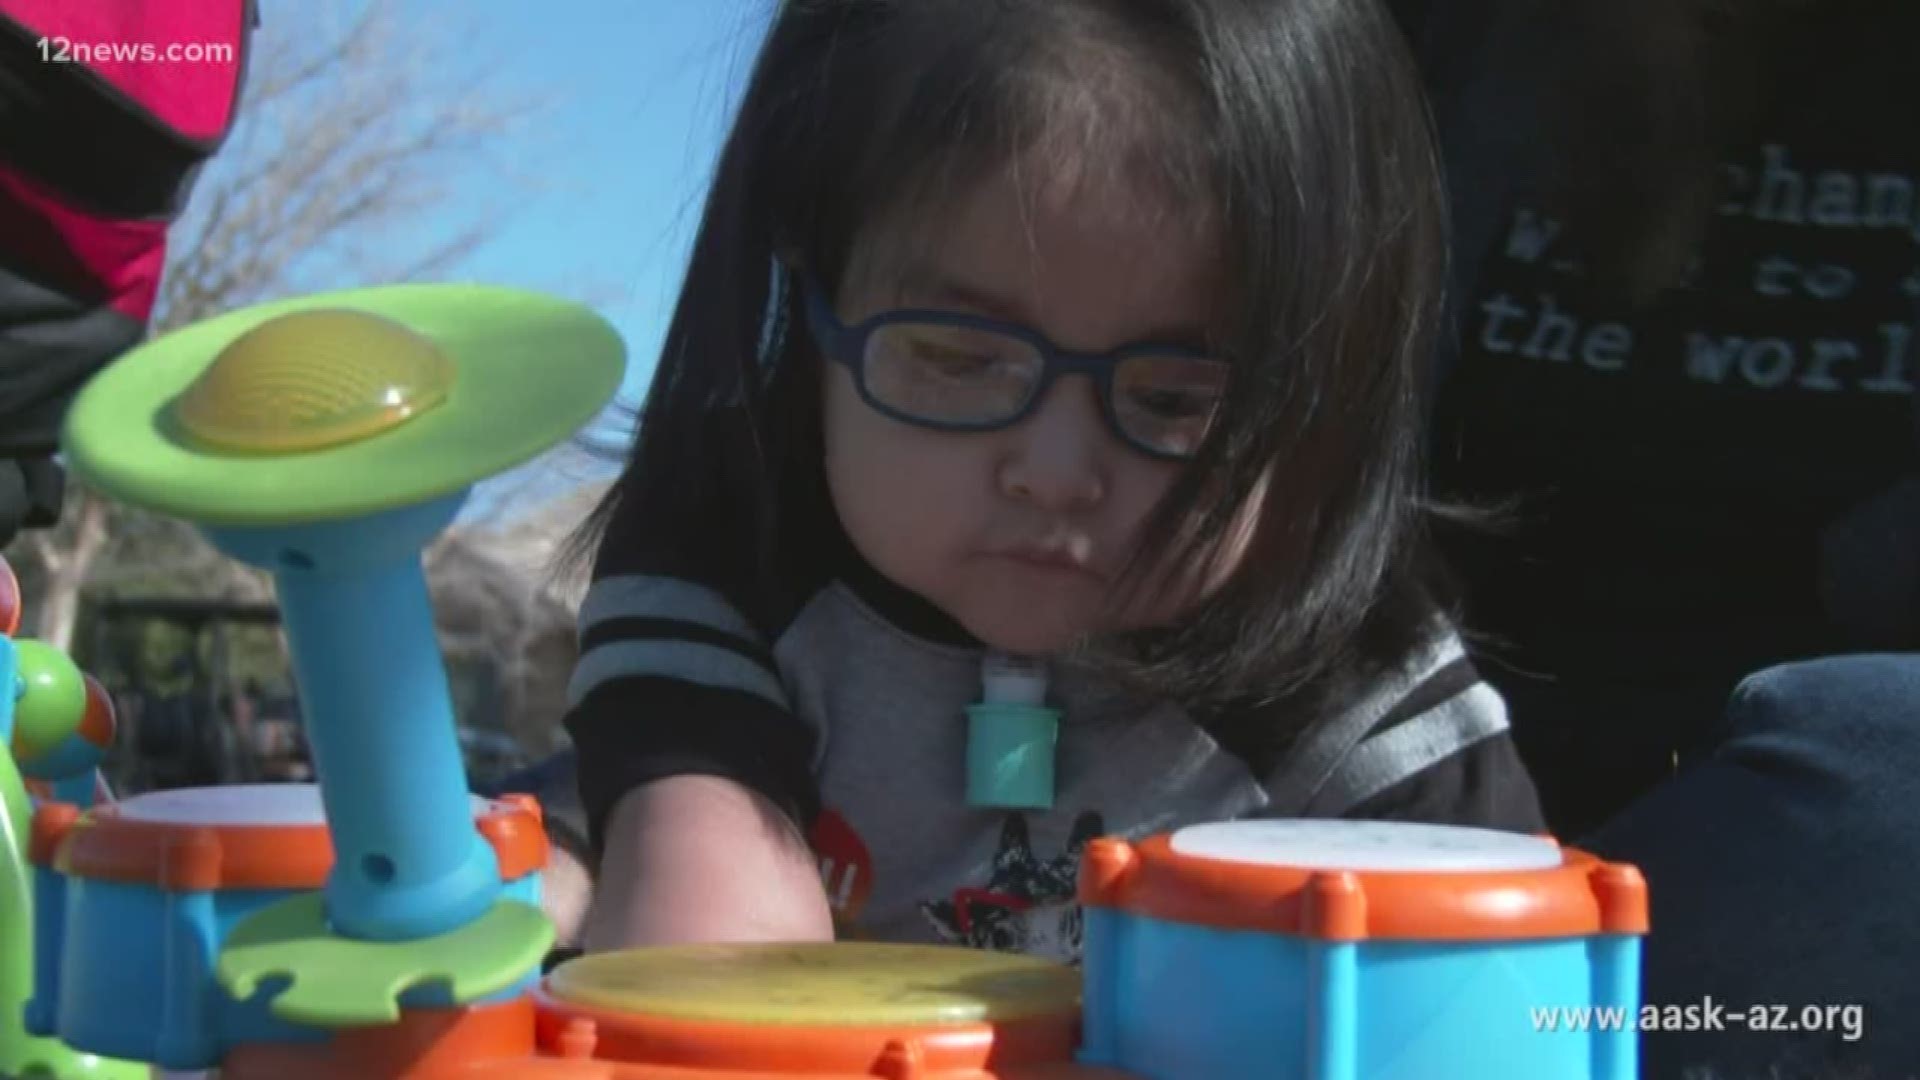 Ariah is a little boy with special needs who needs special parents to help him thrive.